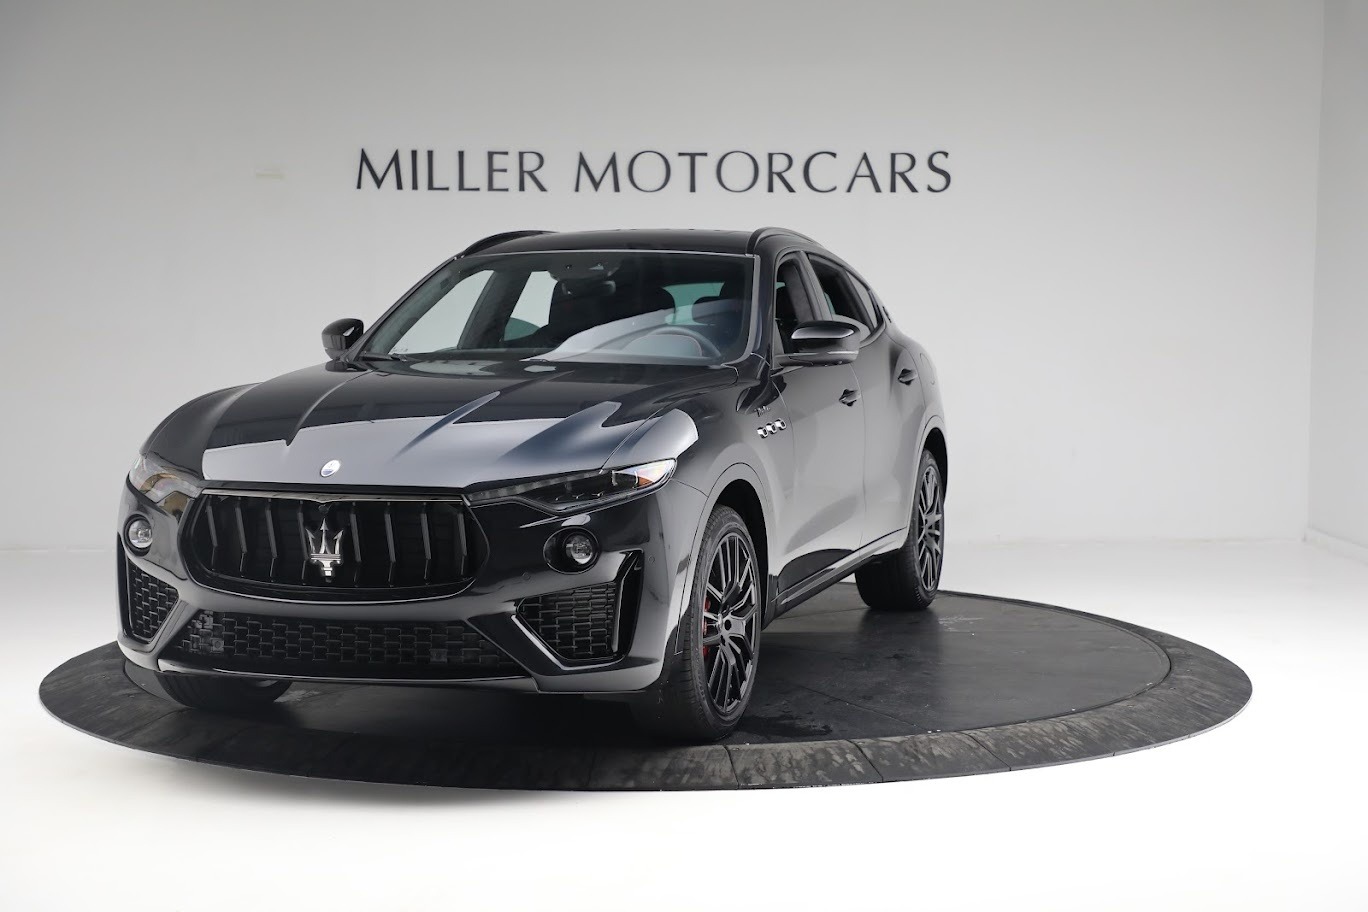 New 2022 Maserati Levante Modena for sale Call for price at Bentley Greenwich in Greenwich CT 06830 1